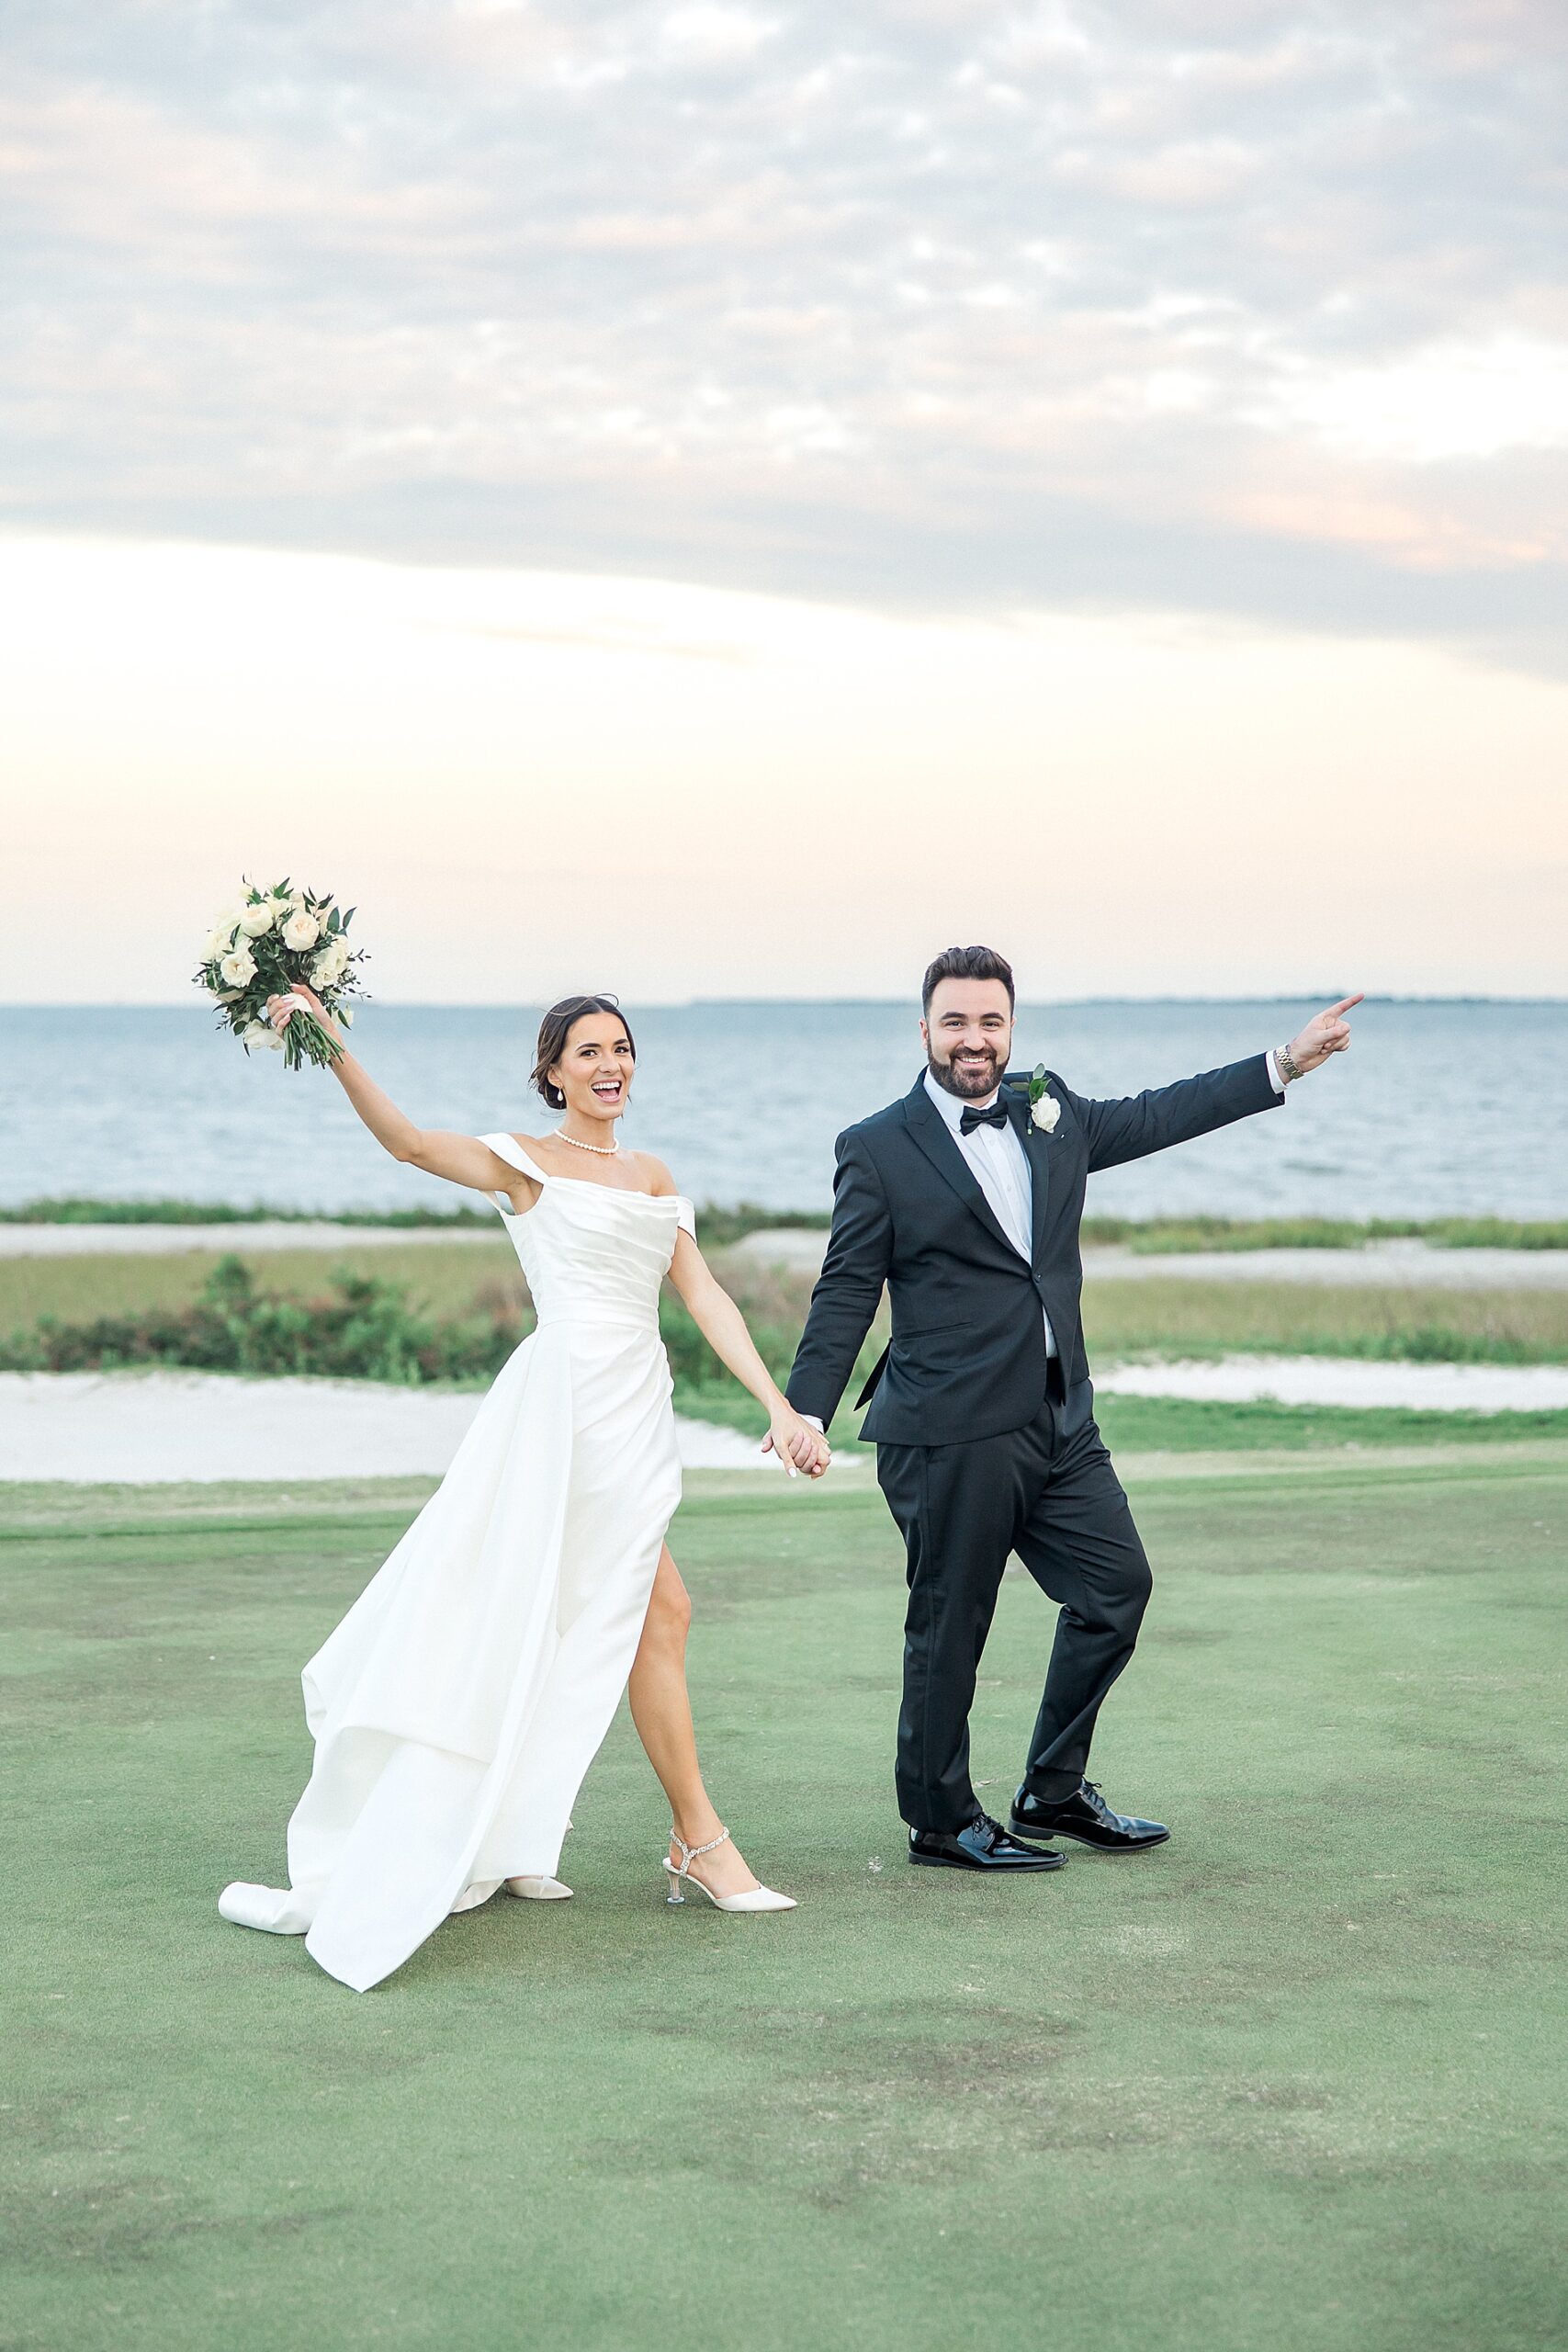 newlyweds celebrate by the water during wedding portraits